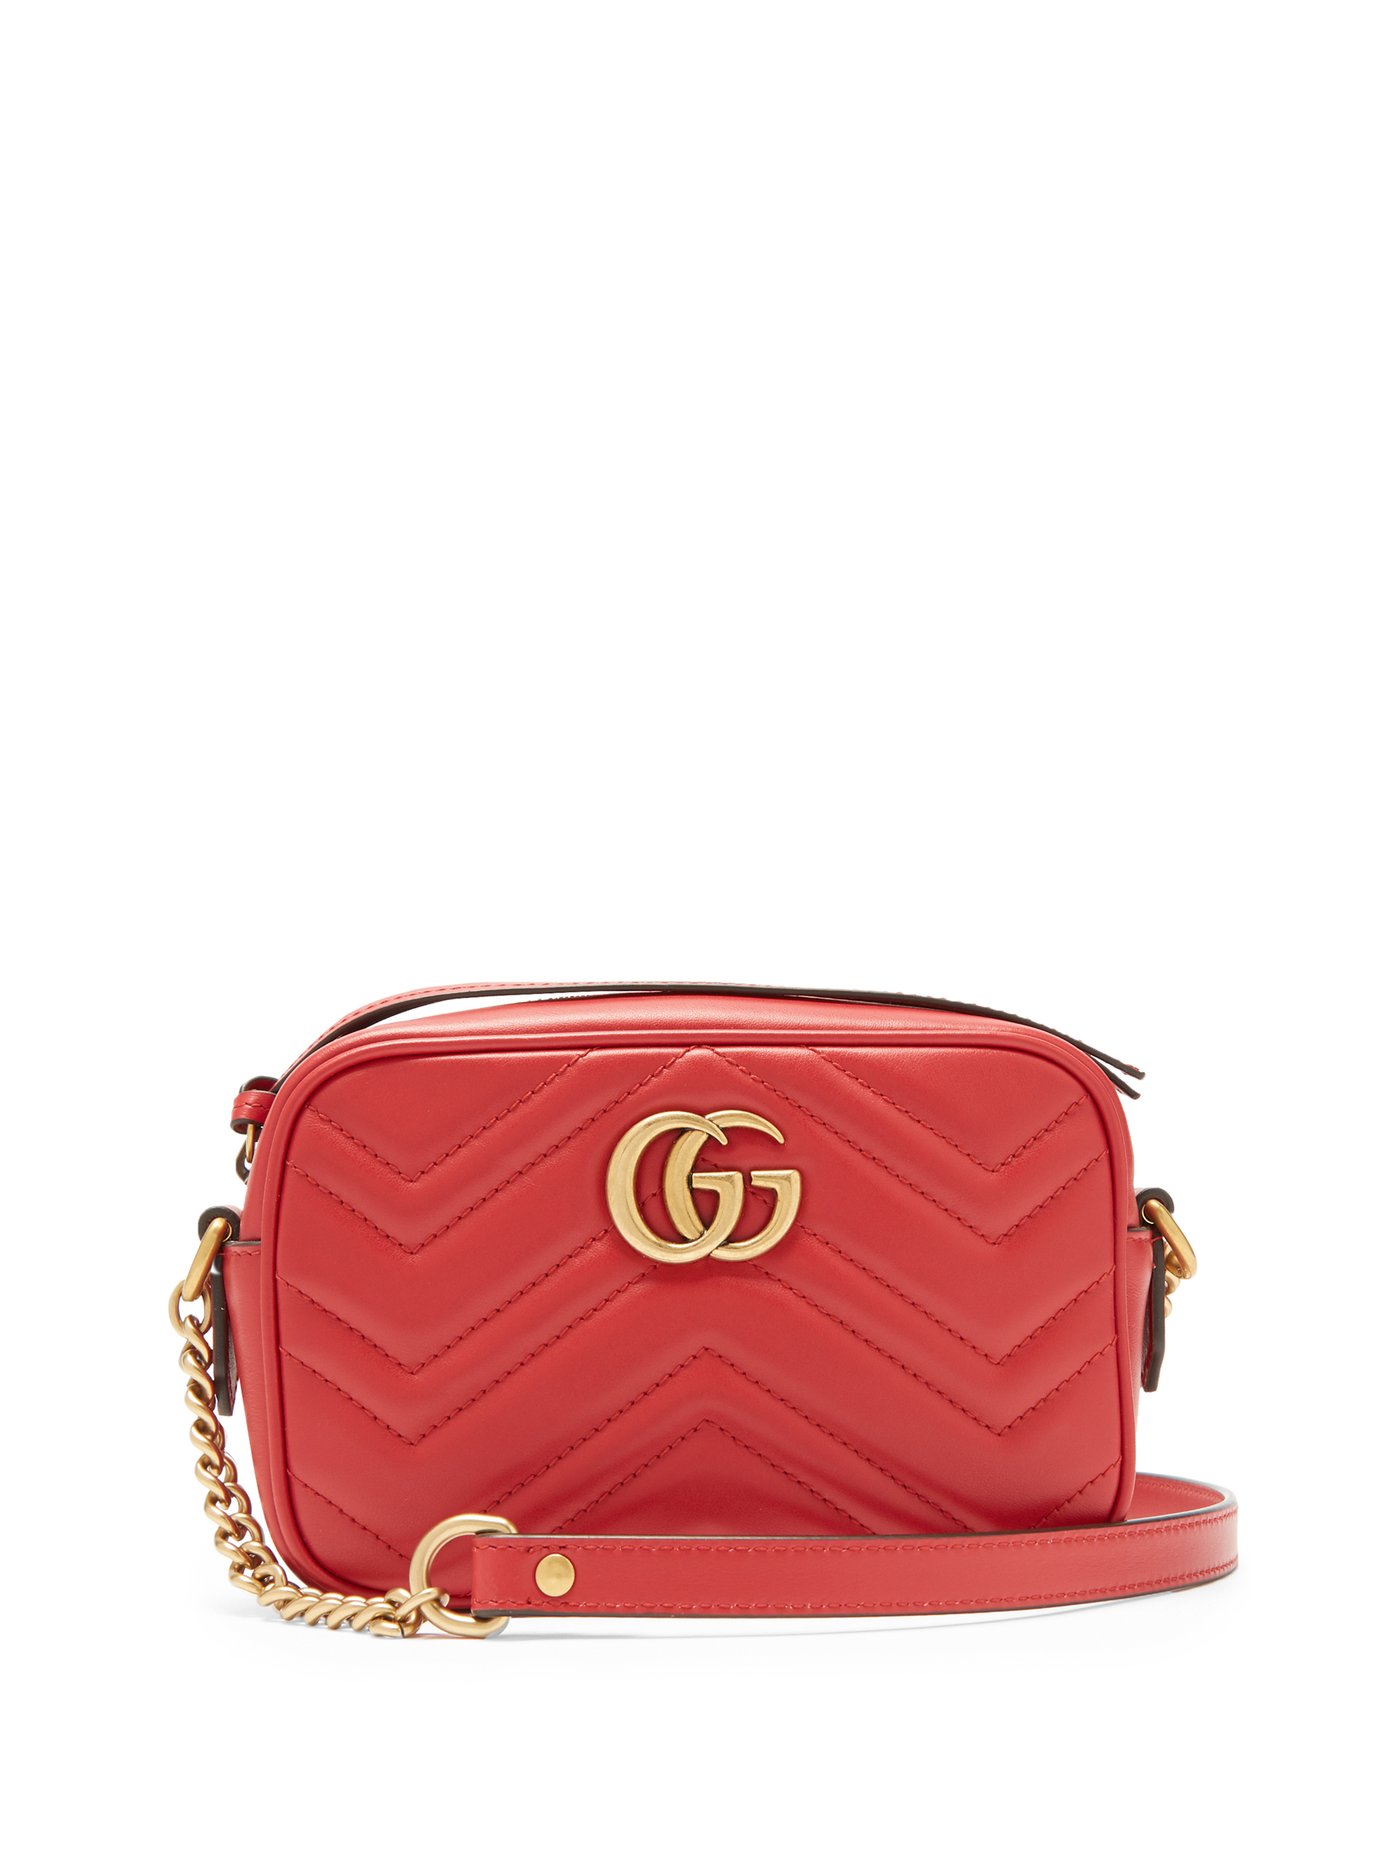 red gucci marmont bag